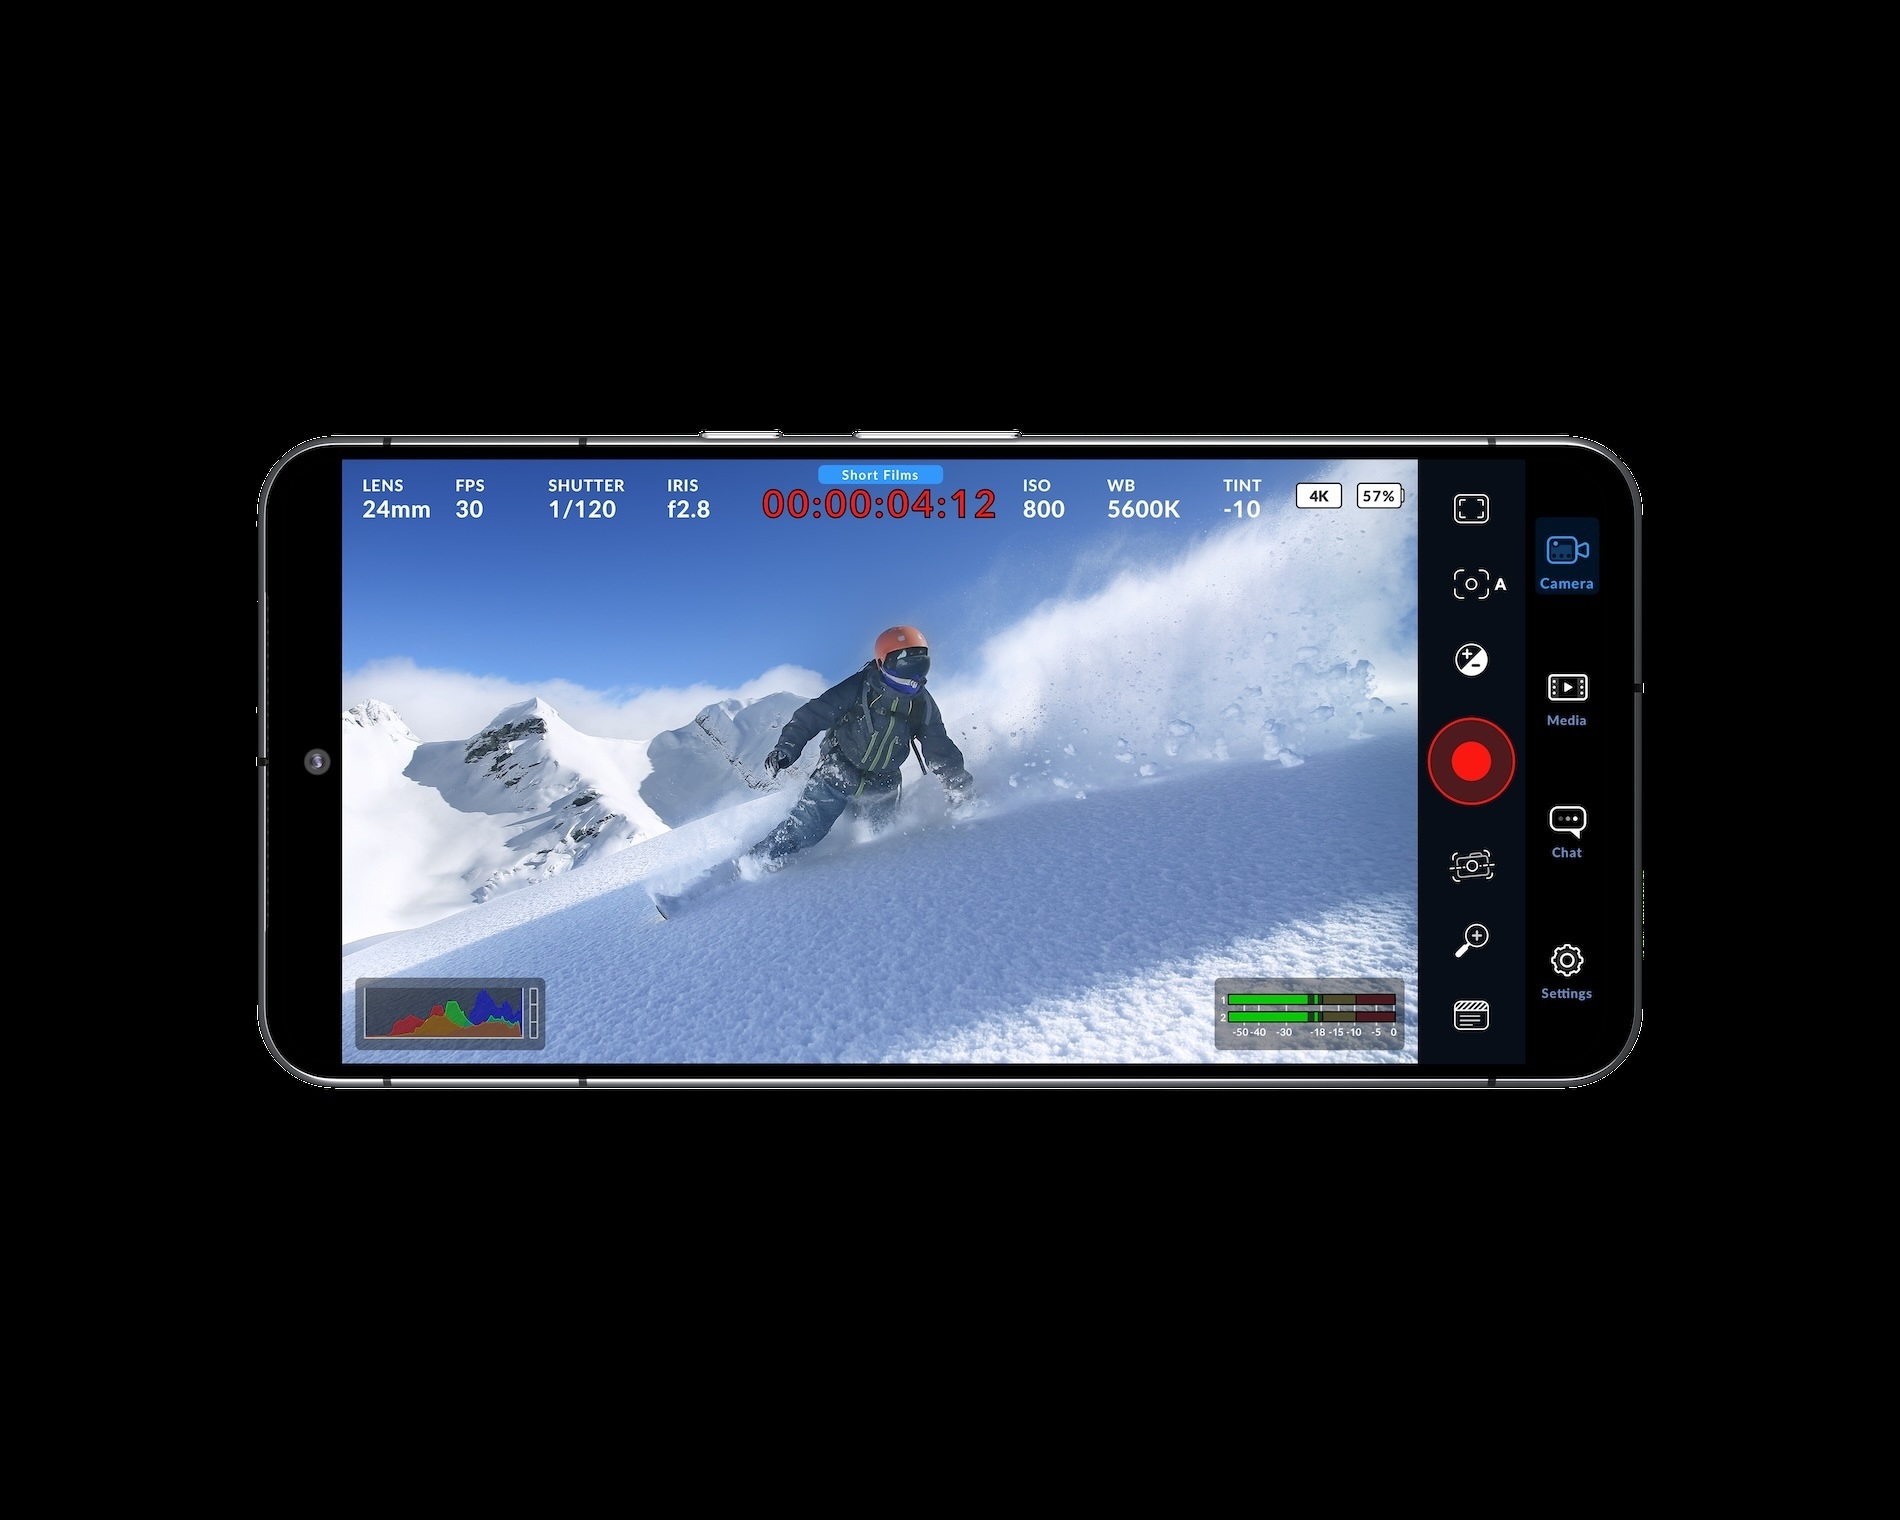 NP Blackmagic Camera for Android